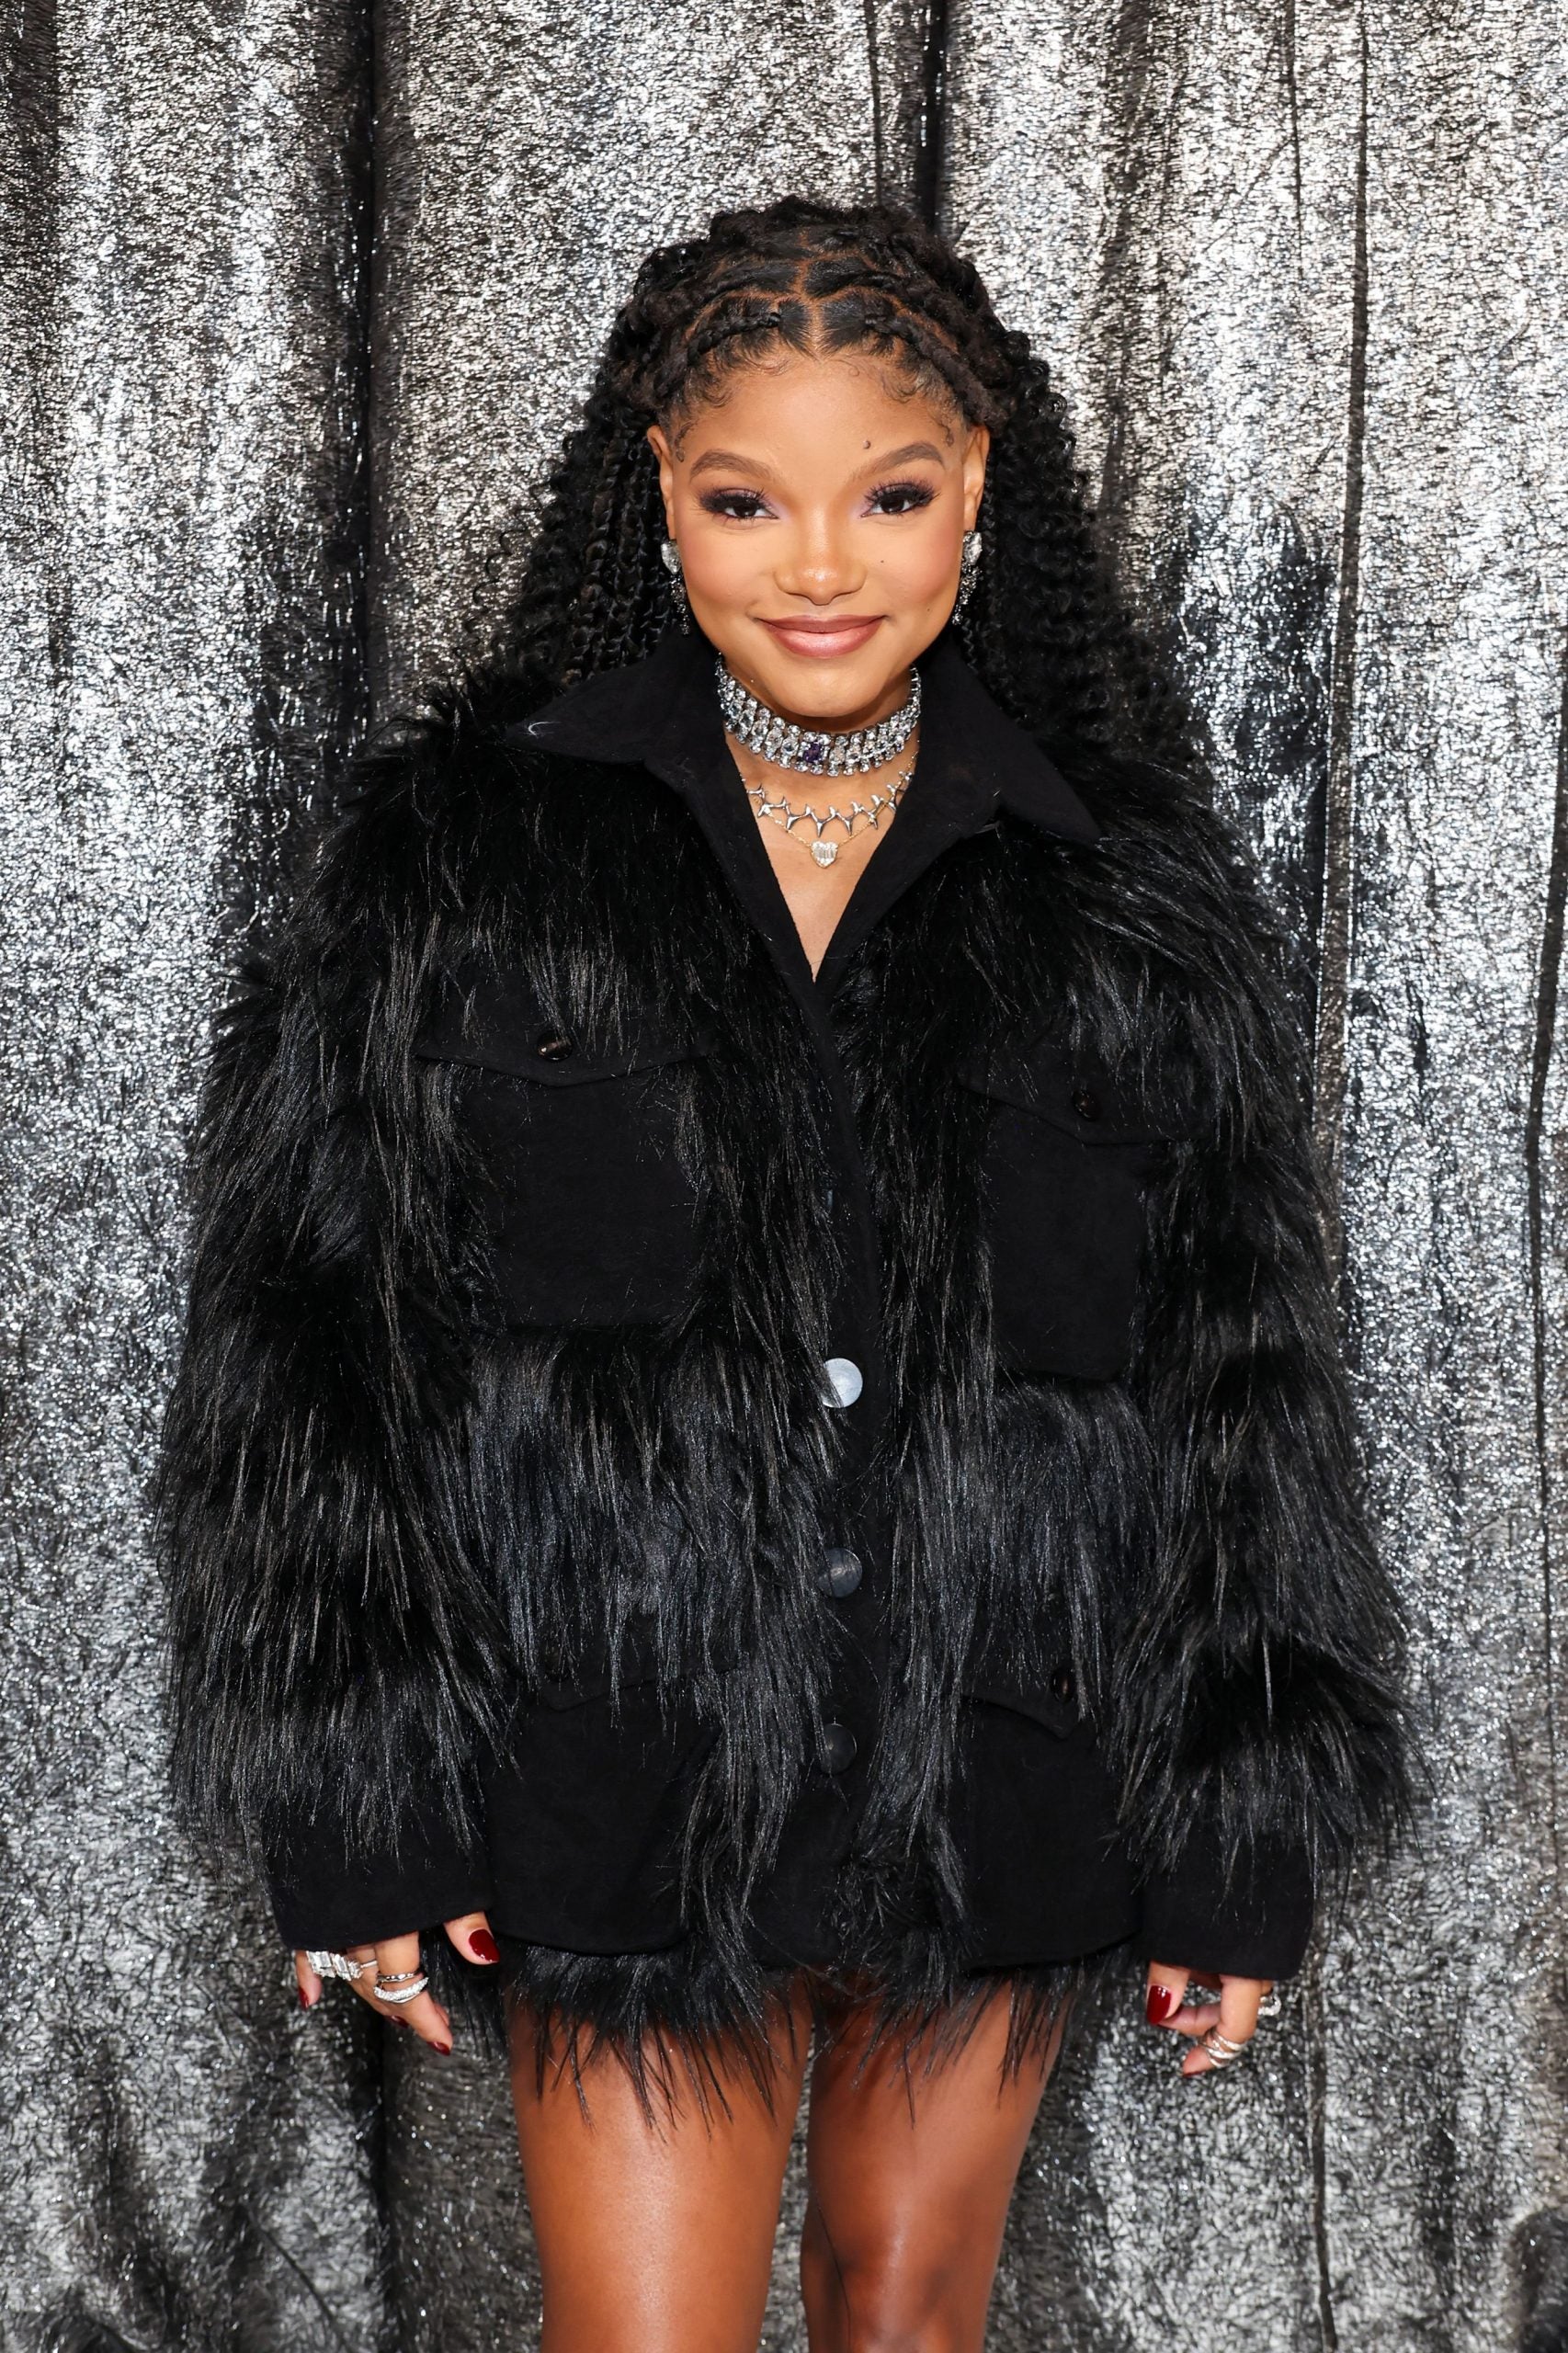 Halle Bailey Doesn’t Owe You An Explanation About What’s Going On With Her Body